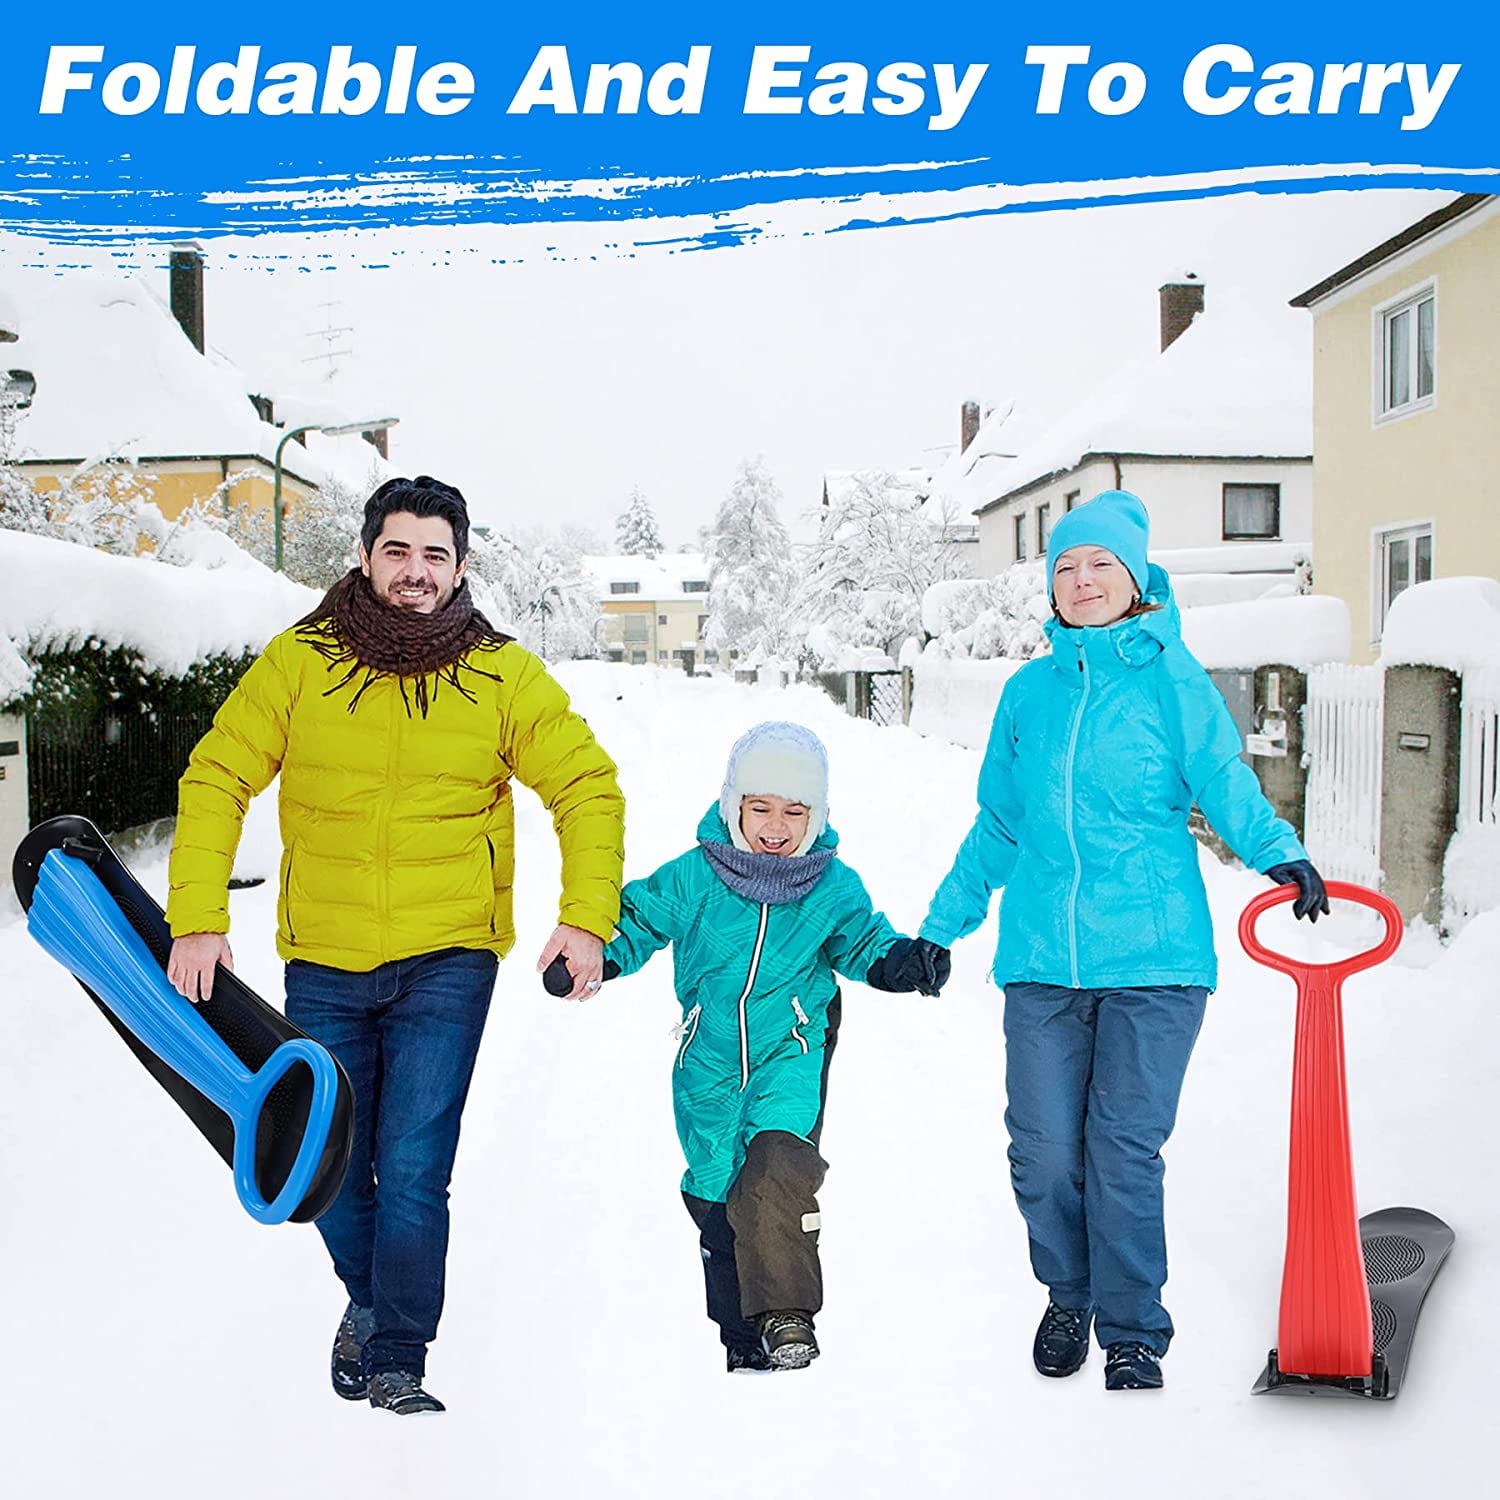 or 1 Pack-Red） Fold-up Snow Scooter with Handle Durable Snowboard Kick-Scooter Sliding Snow Sled for Kids Outdoor Fun Winter Toys for Use On Snow Sand and Grass（2 Pack-Red&Blue OTES Ski Skooter 